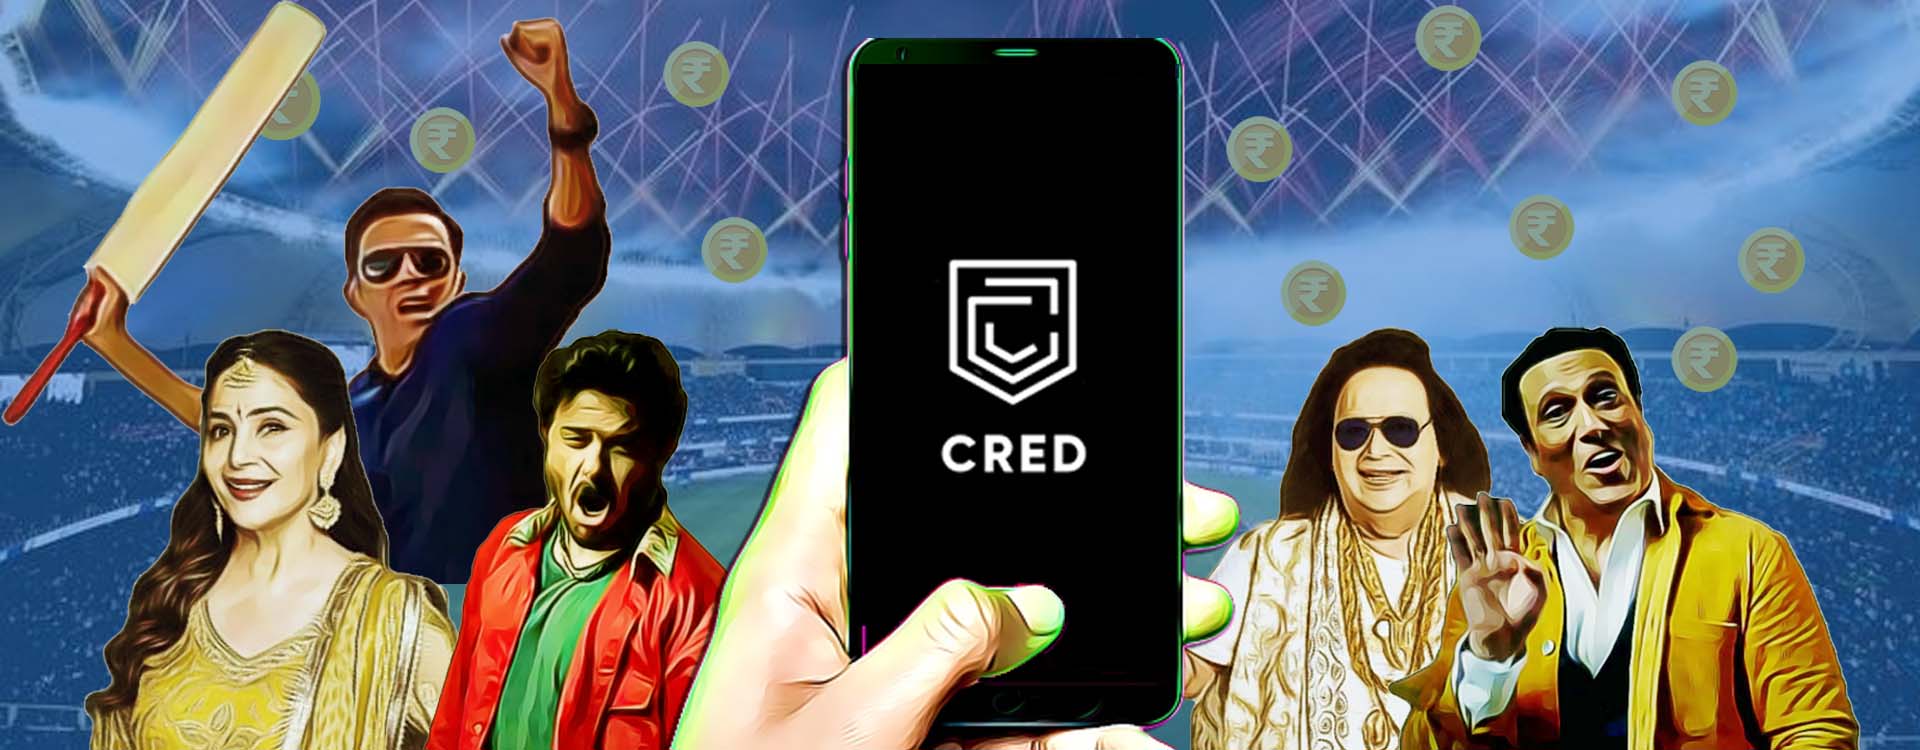 CRED partnership with IPL